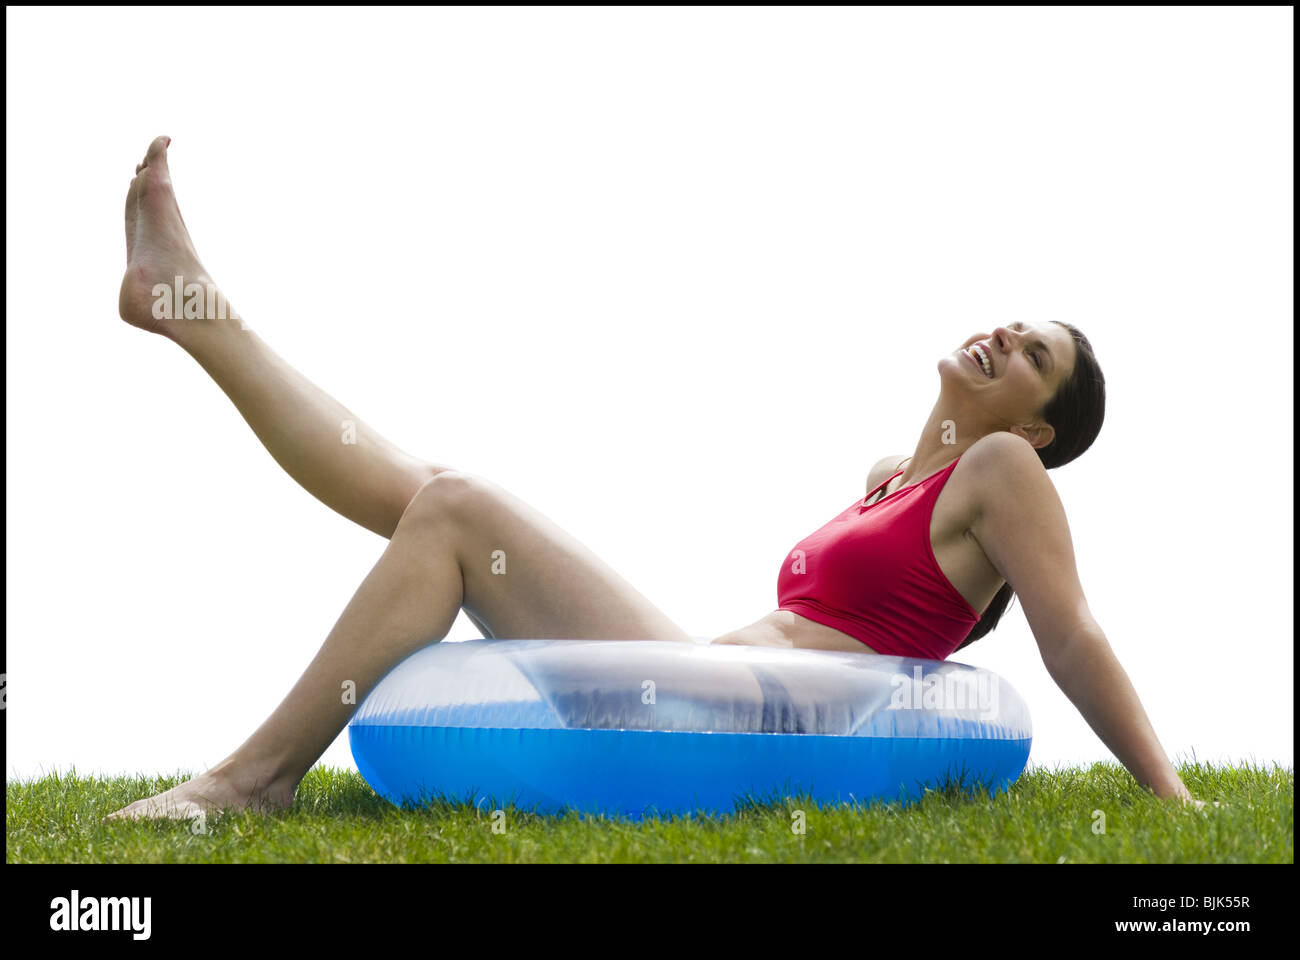 Woman sitting in swimming ring on grass with leg up smiling Stock Photo